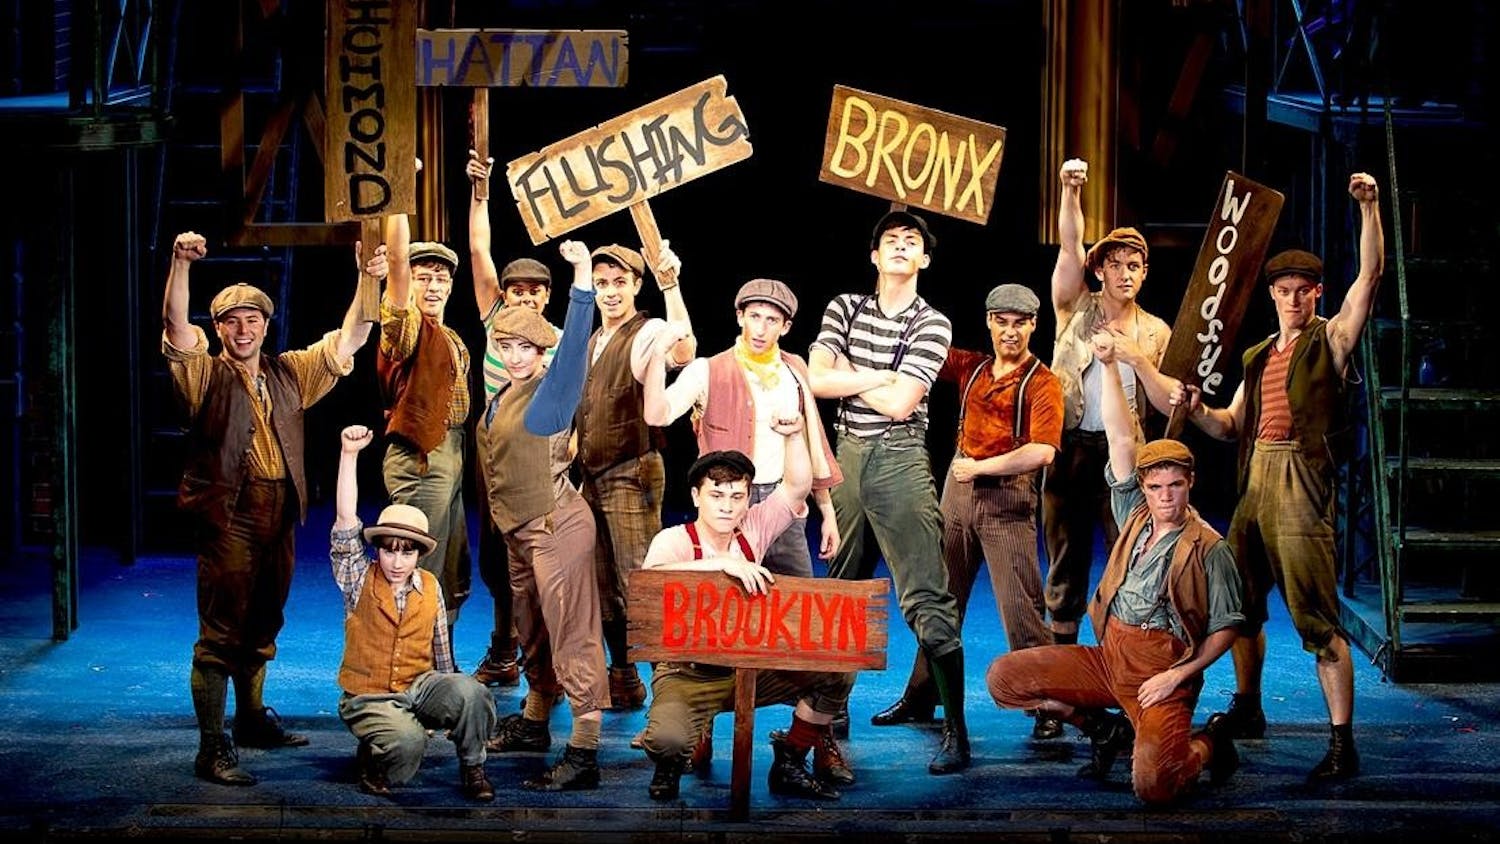 The Buskirk-Chumley Theater will show Disney’s “Newsies” as its 13th annual family holiday musical from Dec. 12-29.